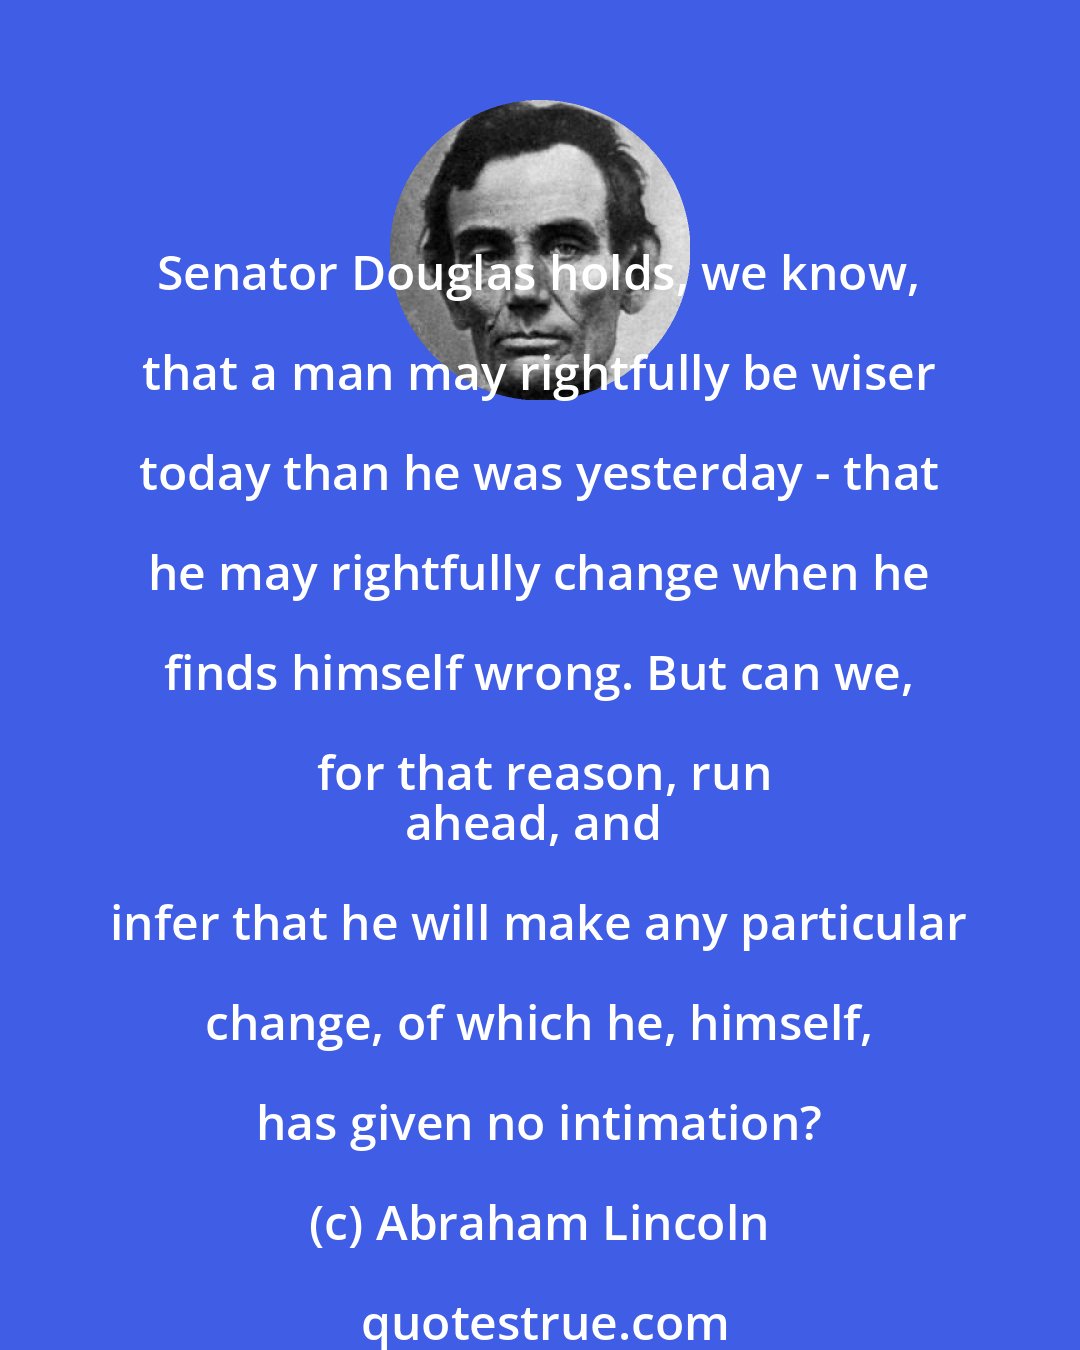 Abraham Lincoln: Senator Douglas holds, we know, that a man may rightfully be wiser today than he was yesterday - that he may rightfully change when he finds himself wrong. But can we, for that reason, run
ahead, and infer that he will make any particular change, of which he, himself, has given no intimation?